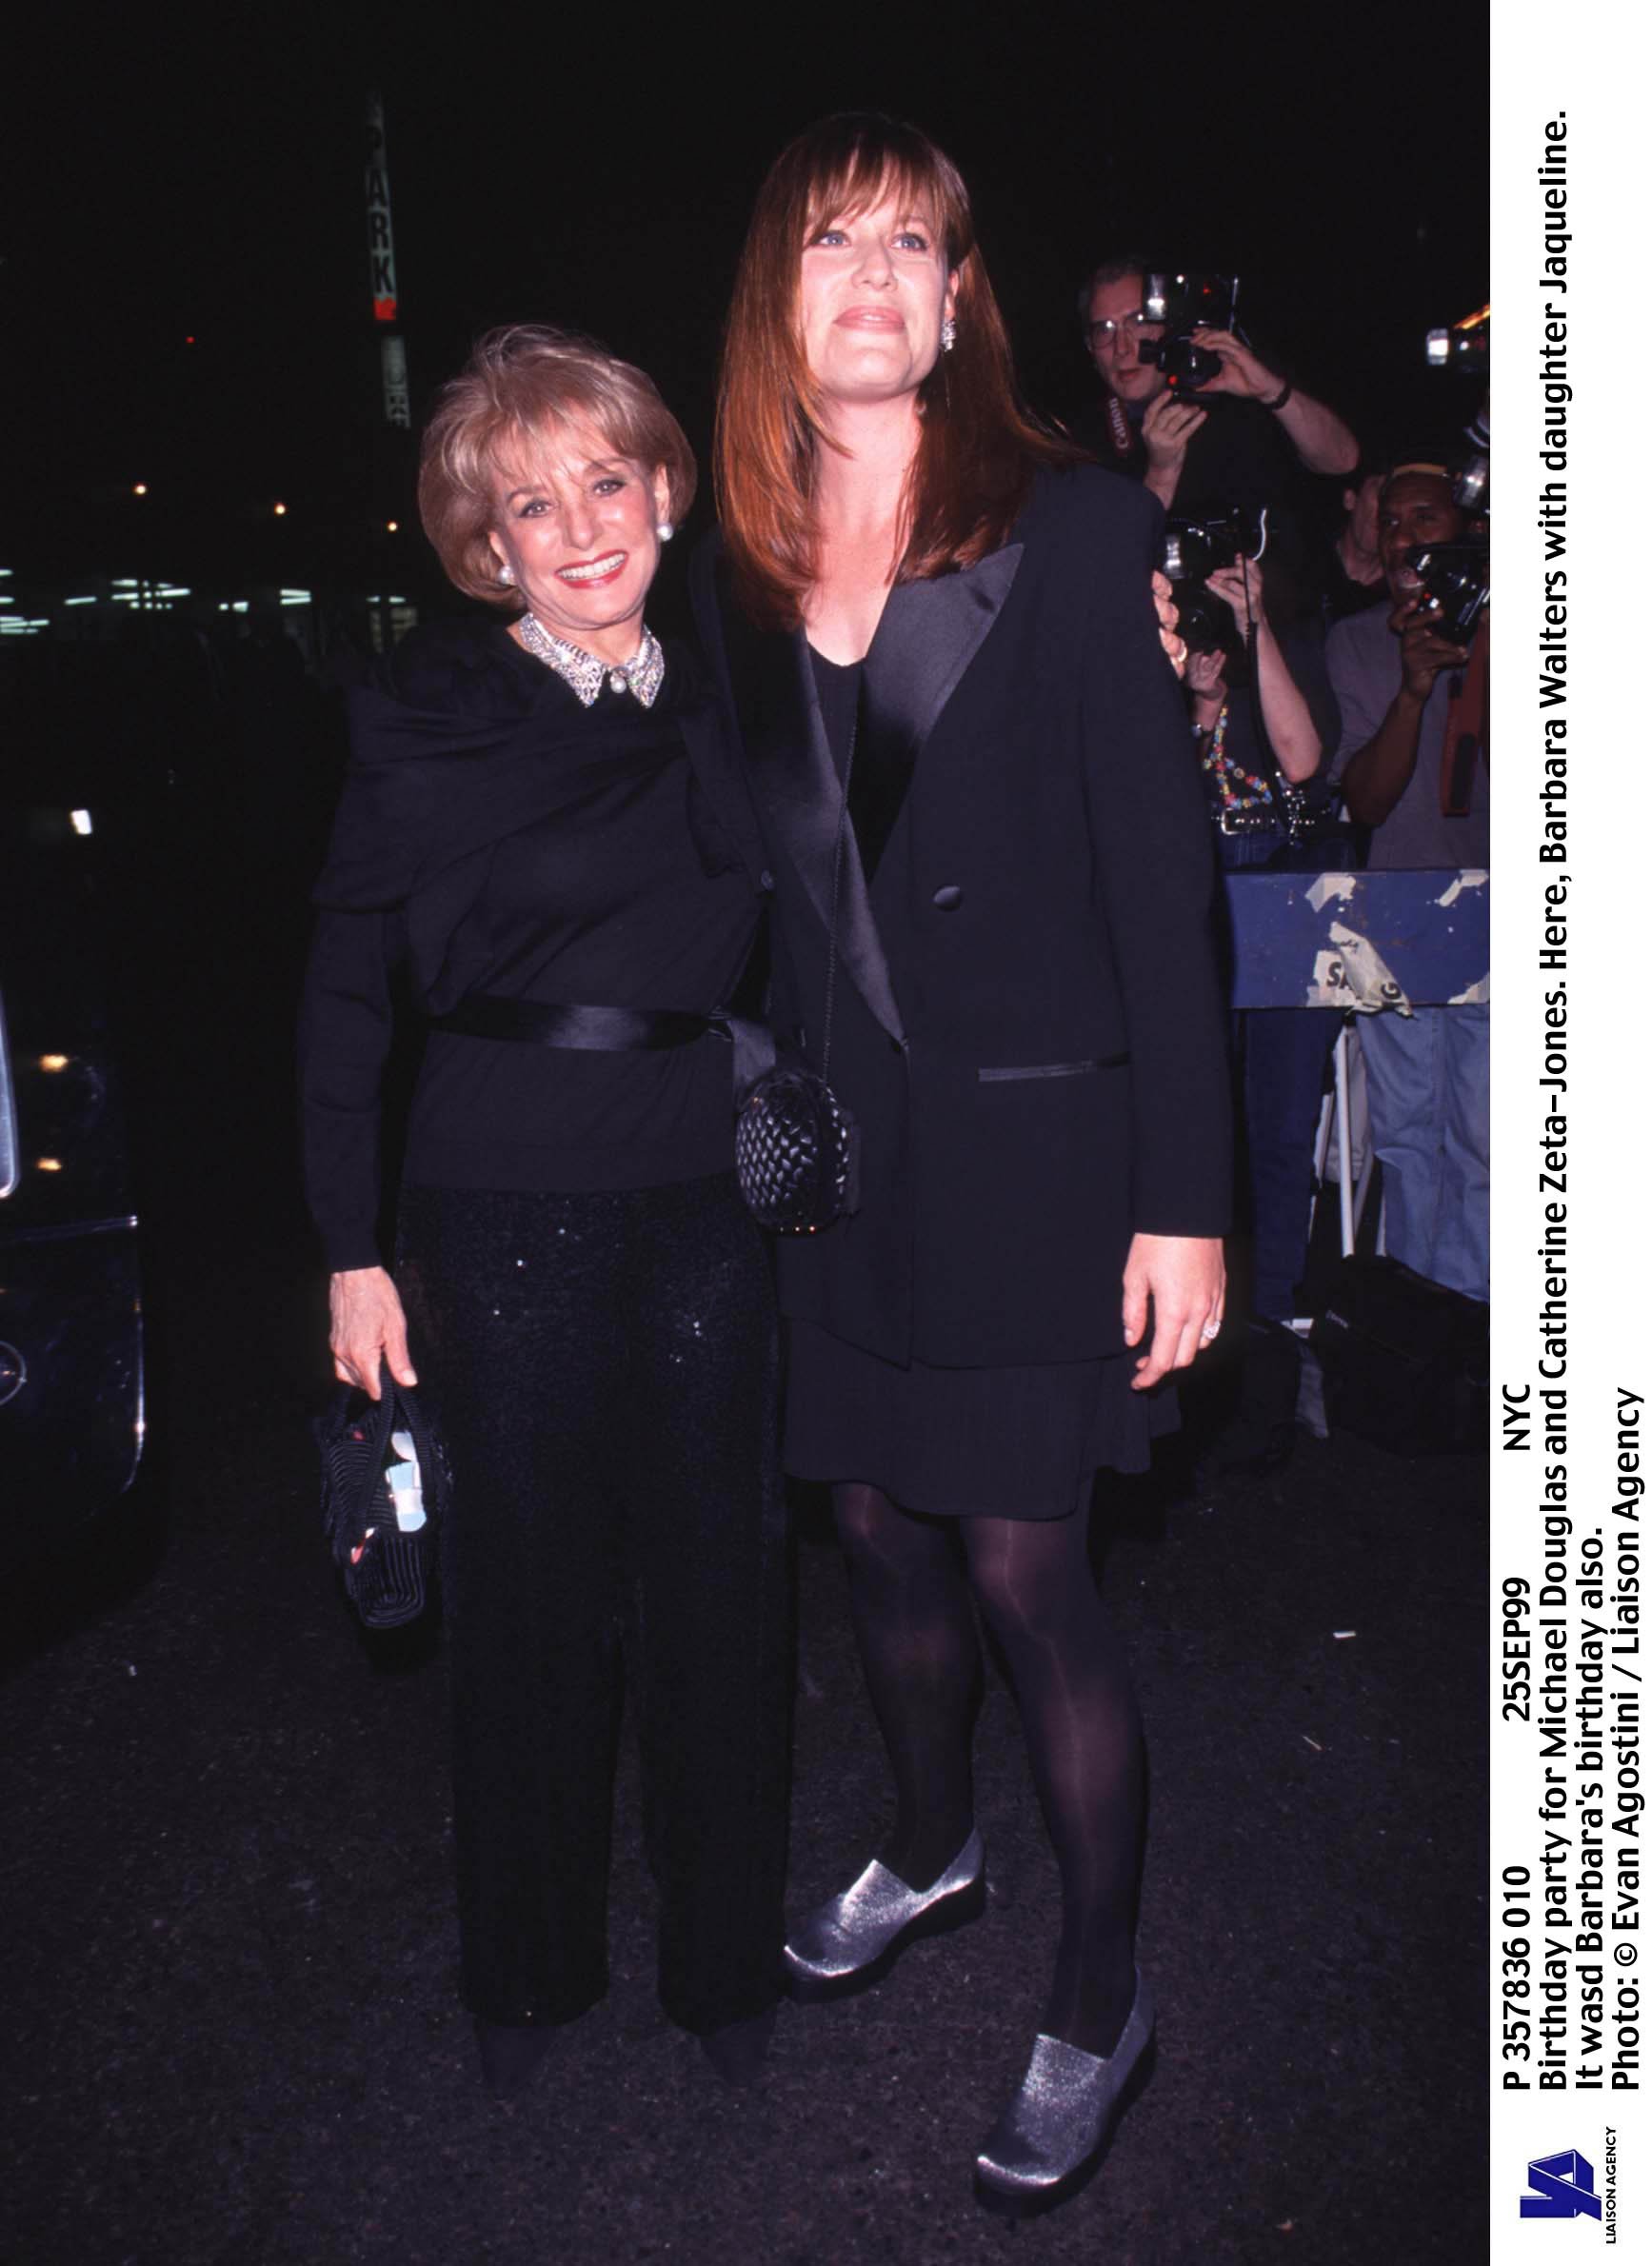 Barbara Walters and Jaqueline Guber attend Michael Douglas and Catherine Zeta-Jones' birthday party on September 25, 1999 in New York City ┃Source: Getty Images